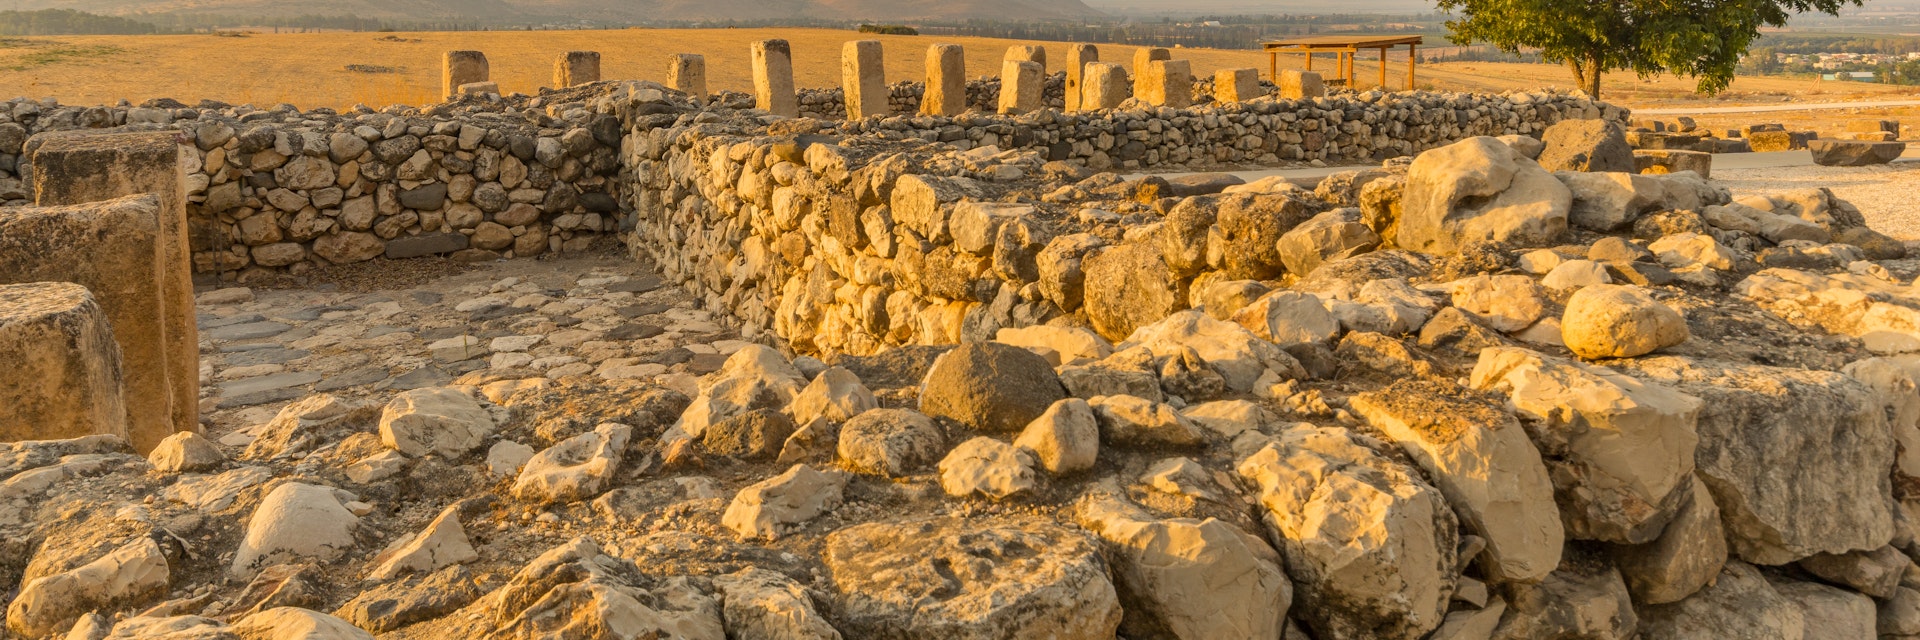 Ancient Israelite buildings remains in Tel Hazor National Park, a UNESCO World Heritage Site in Northern Israel.